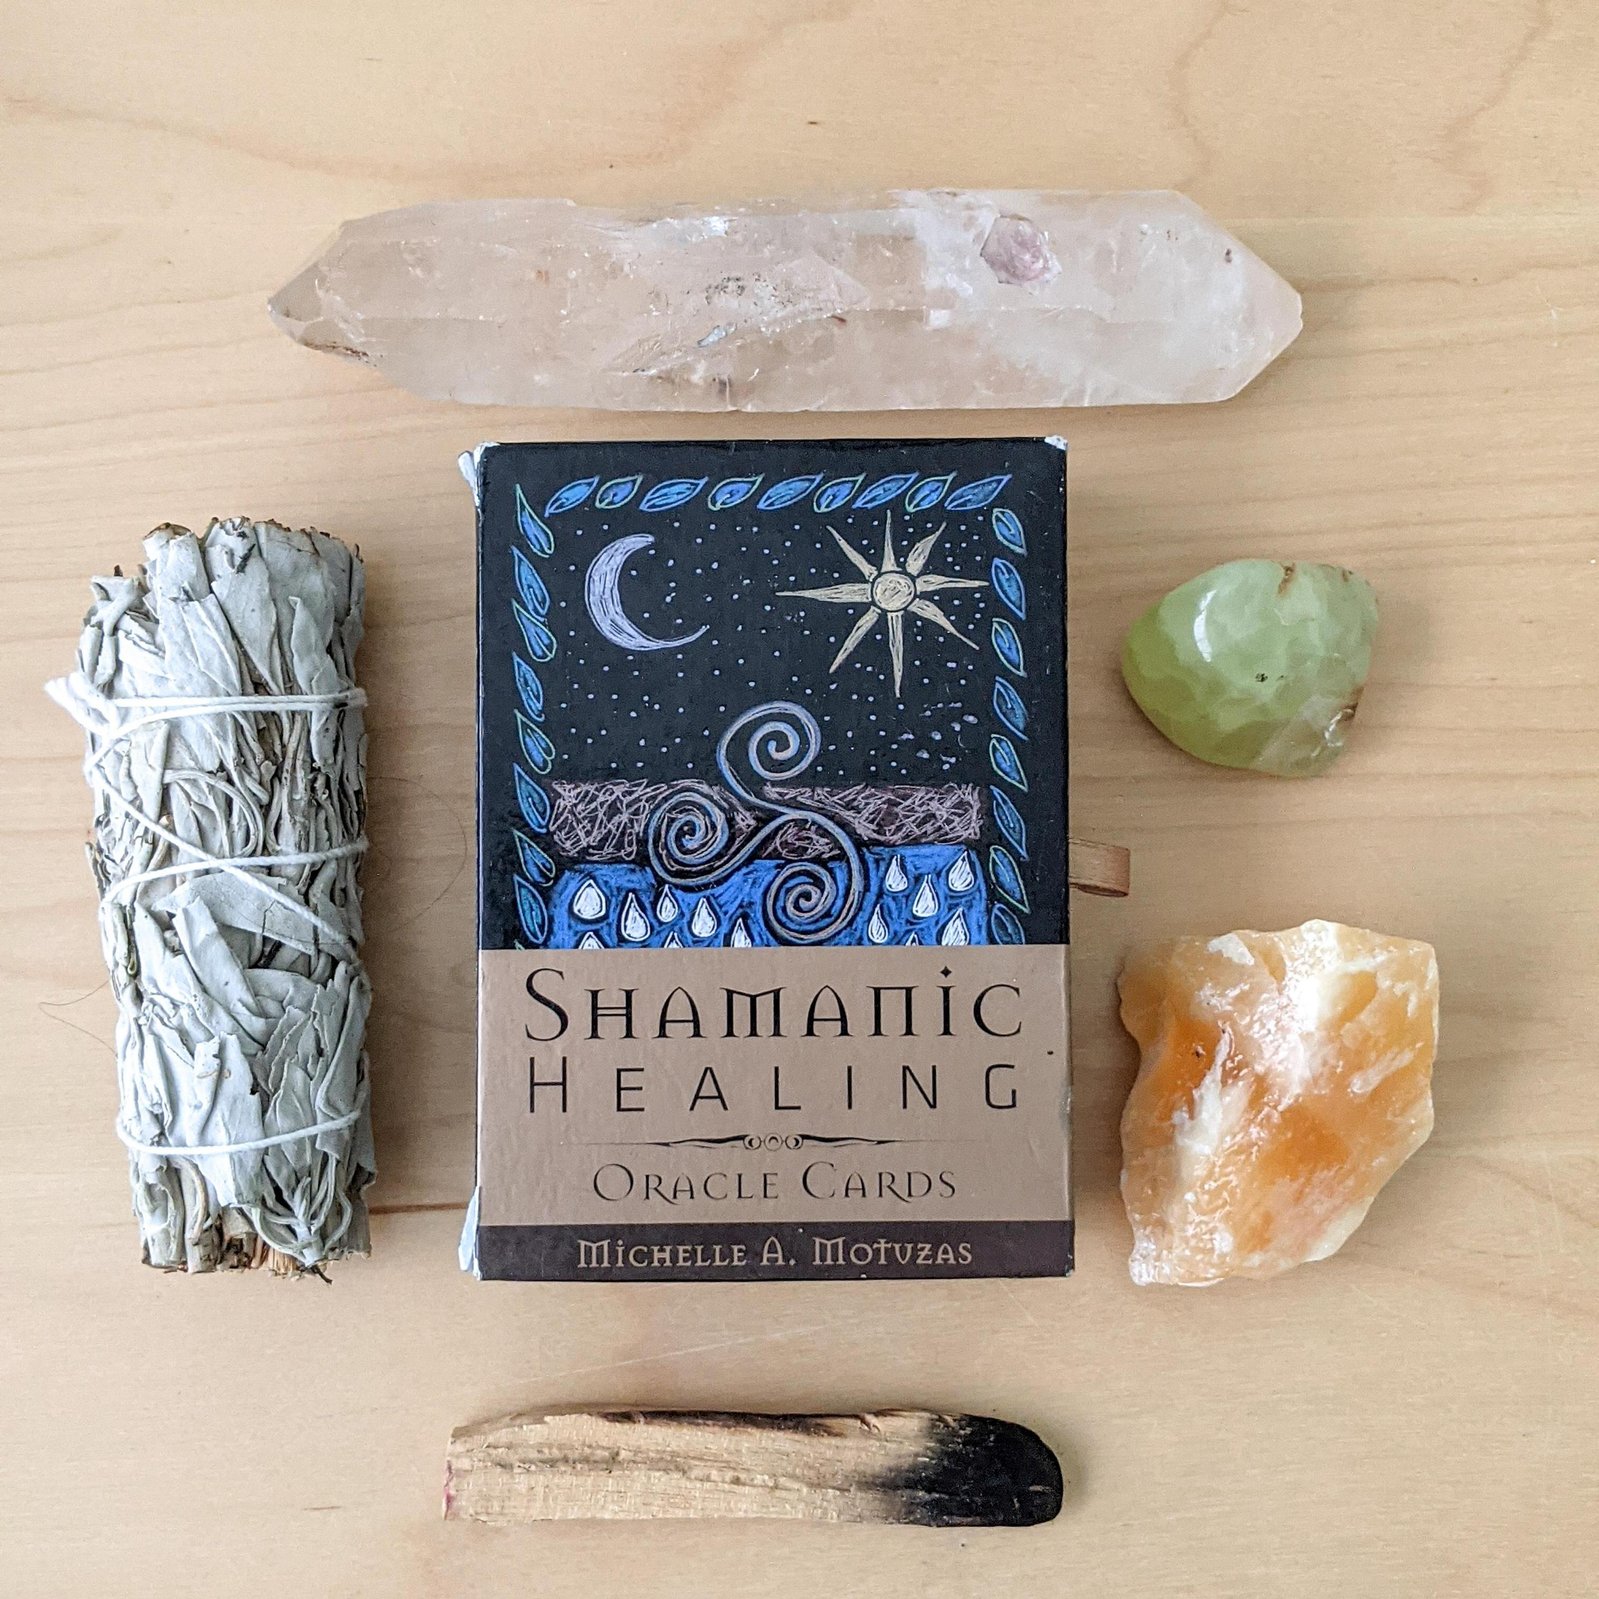 The Shamanic Healing Oracle Deck by Michelle Motuzas published by Schiffer Books